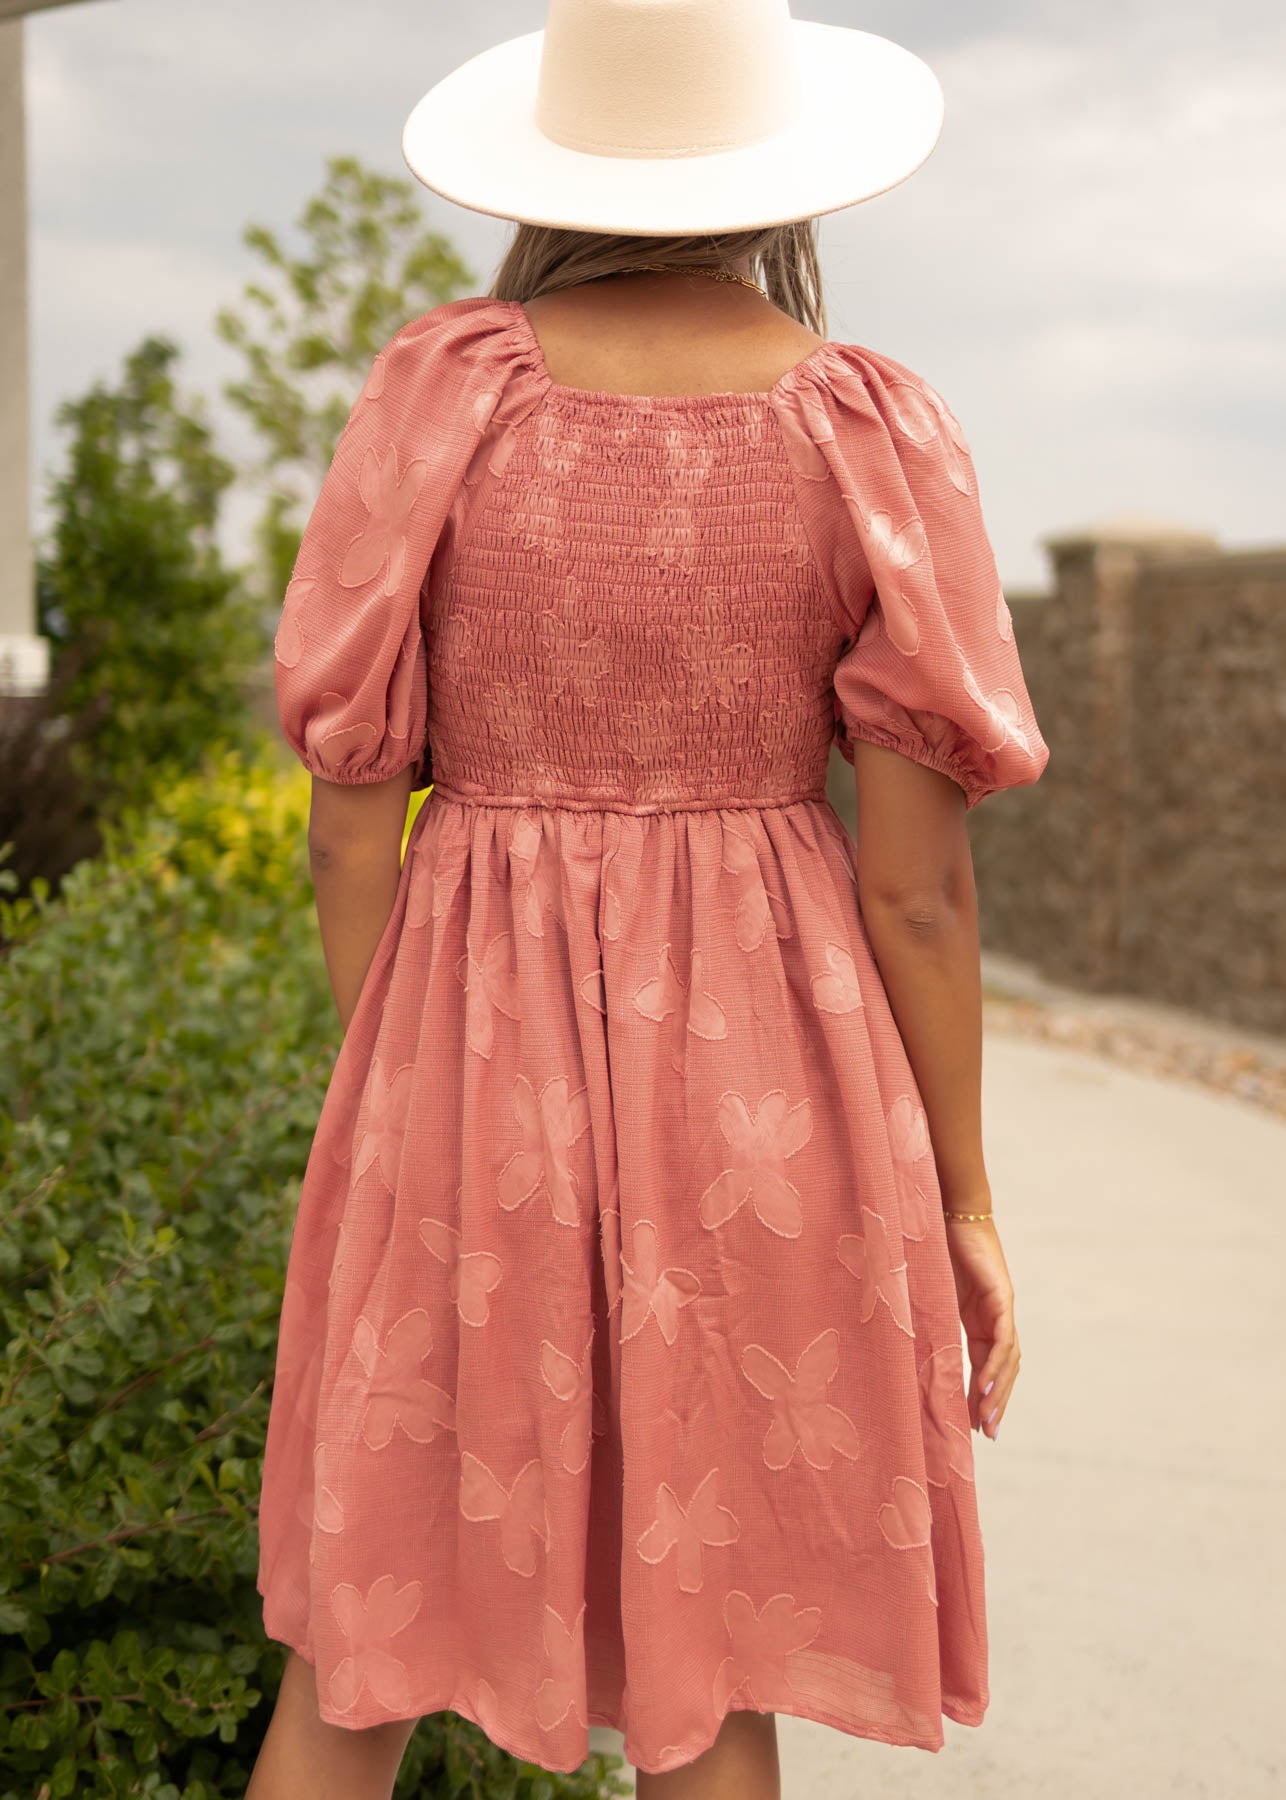 Back view of a dusty rose dress